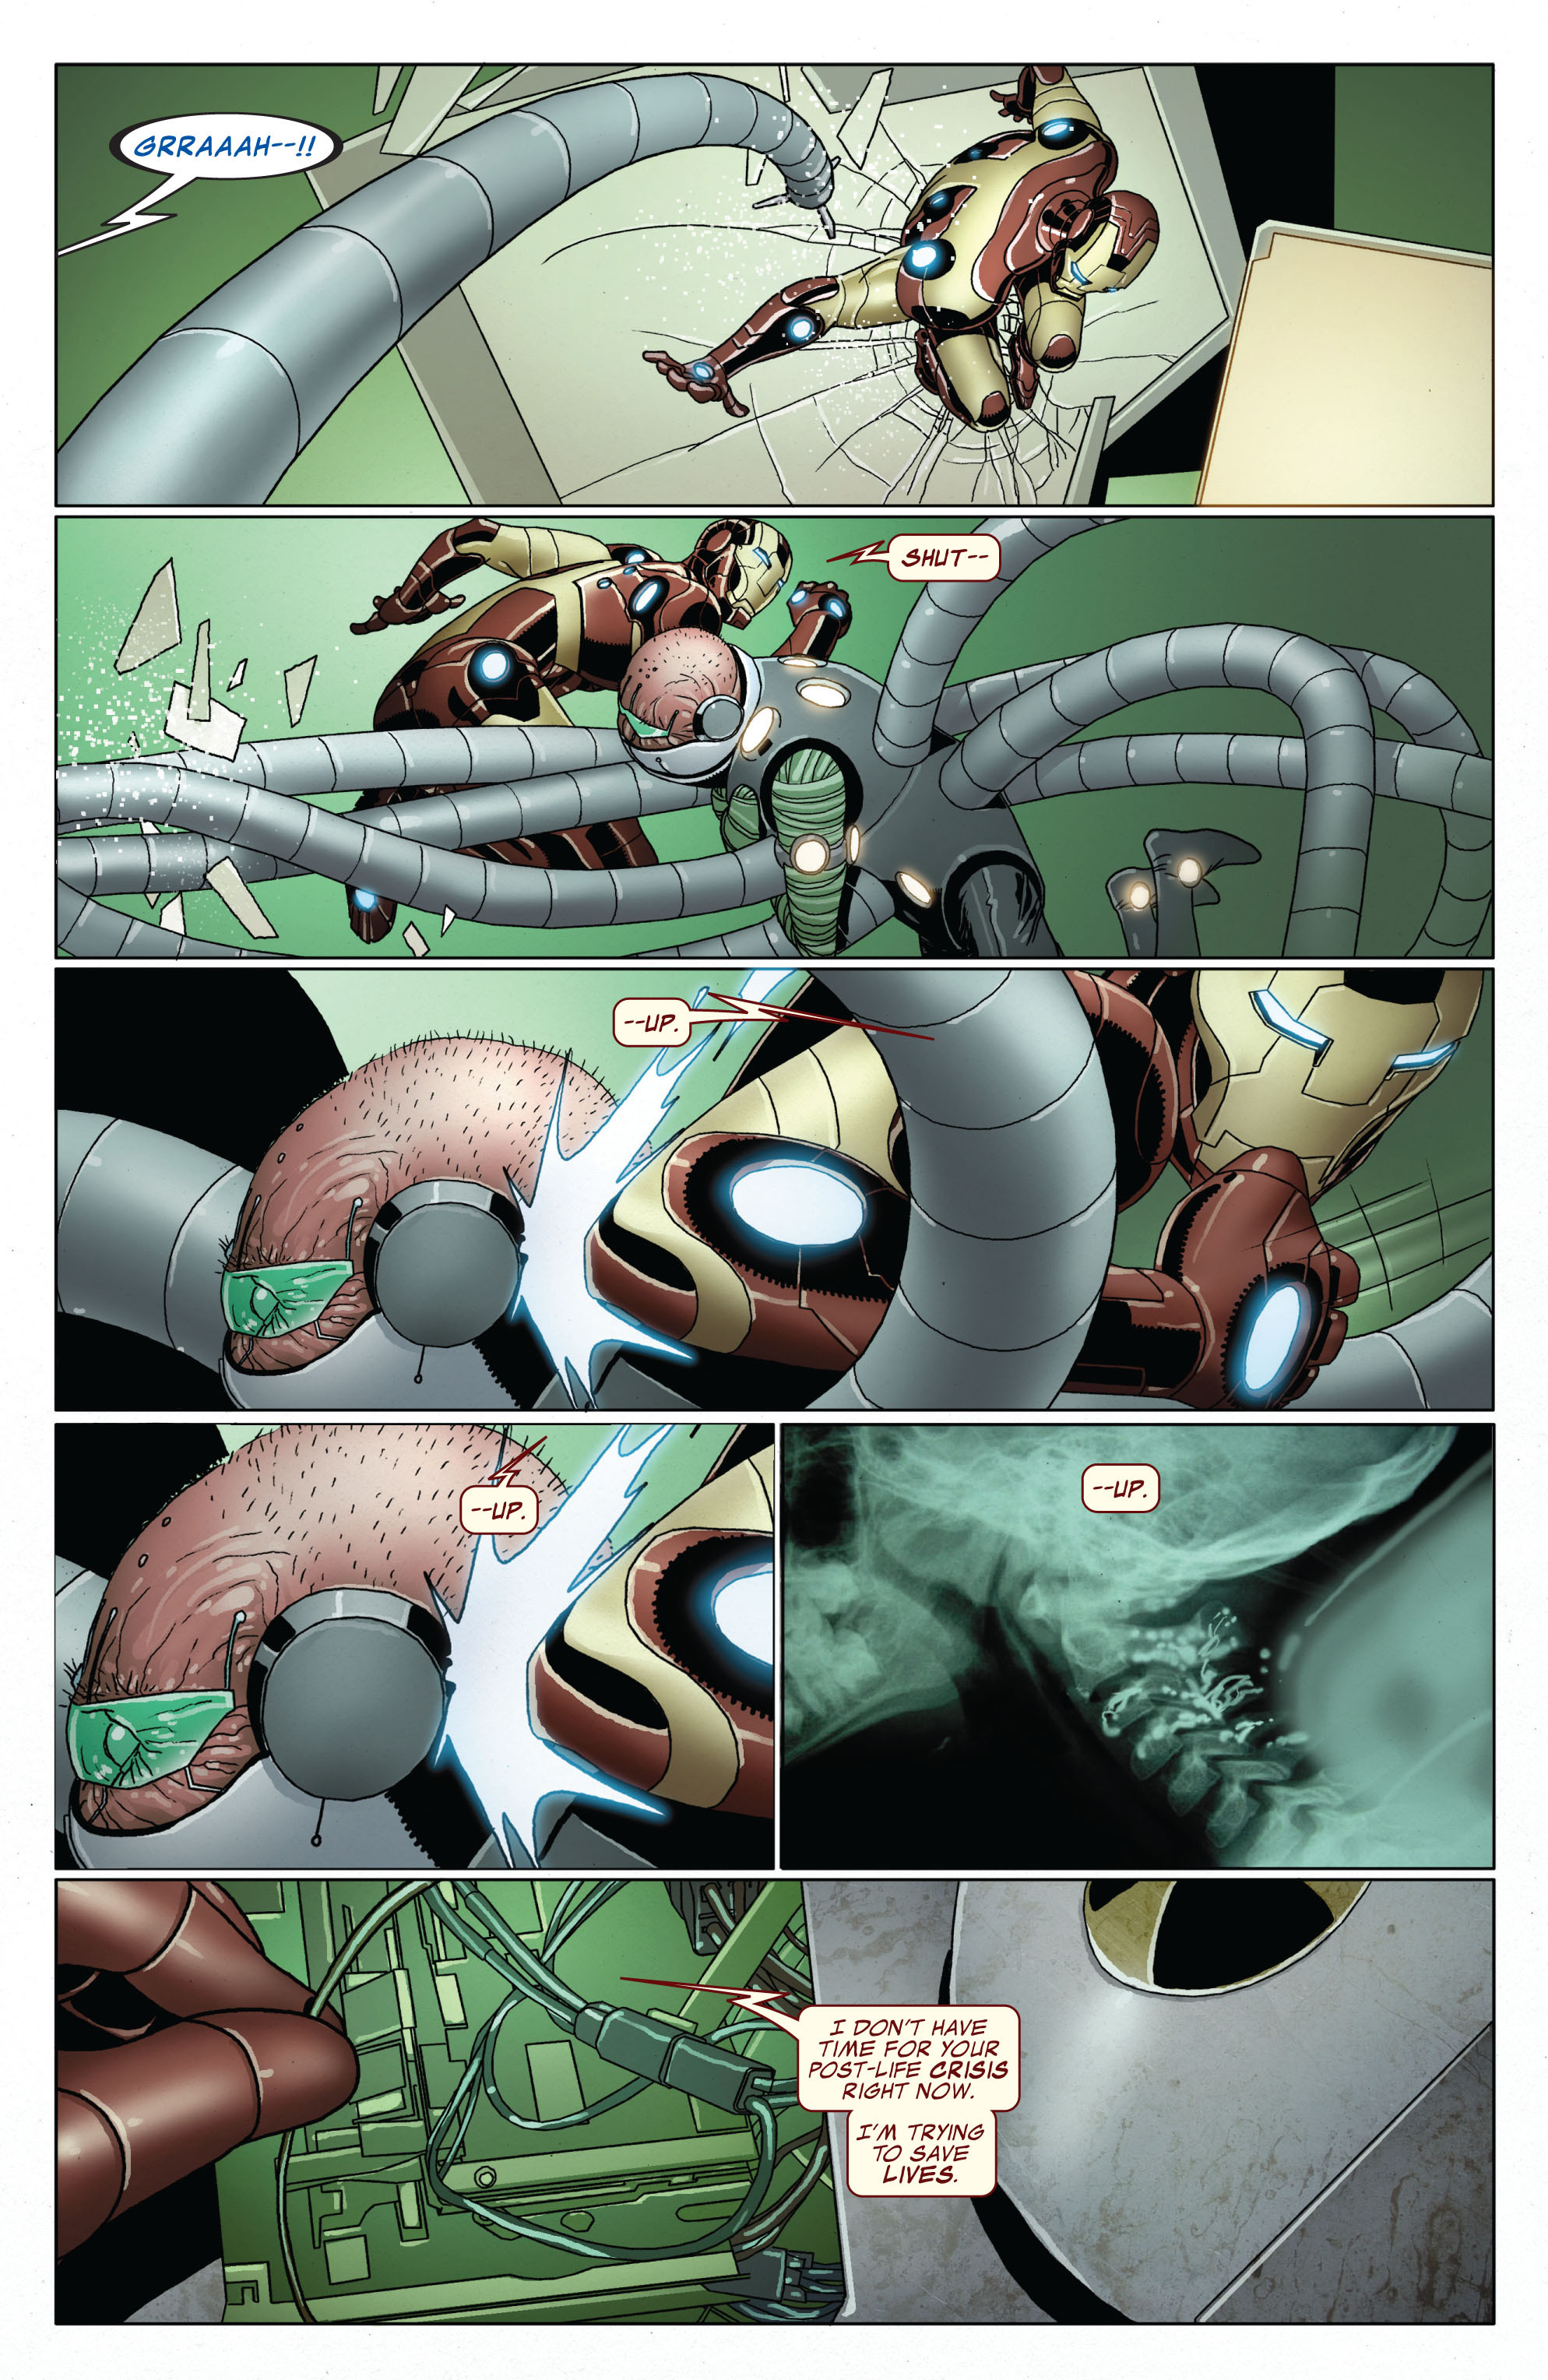 Invincible Iron Man (2008) 503 Page 4